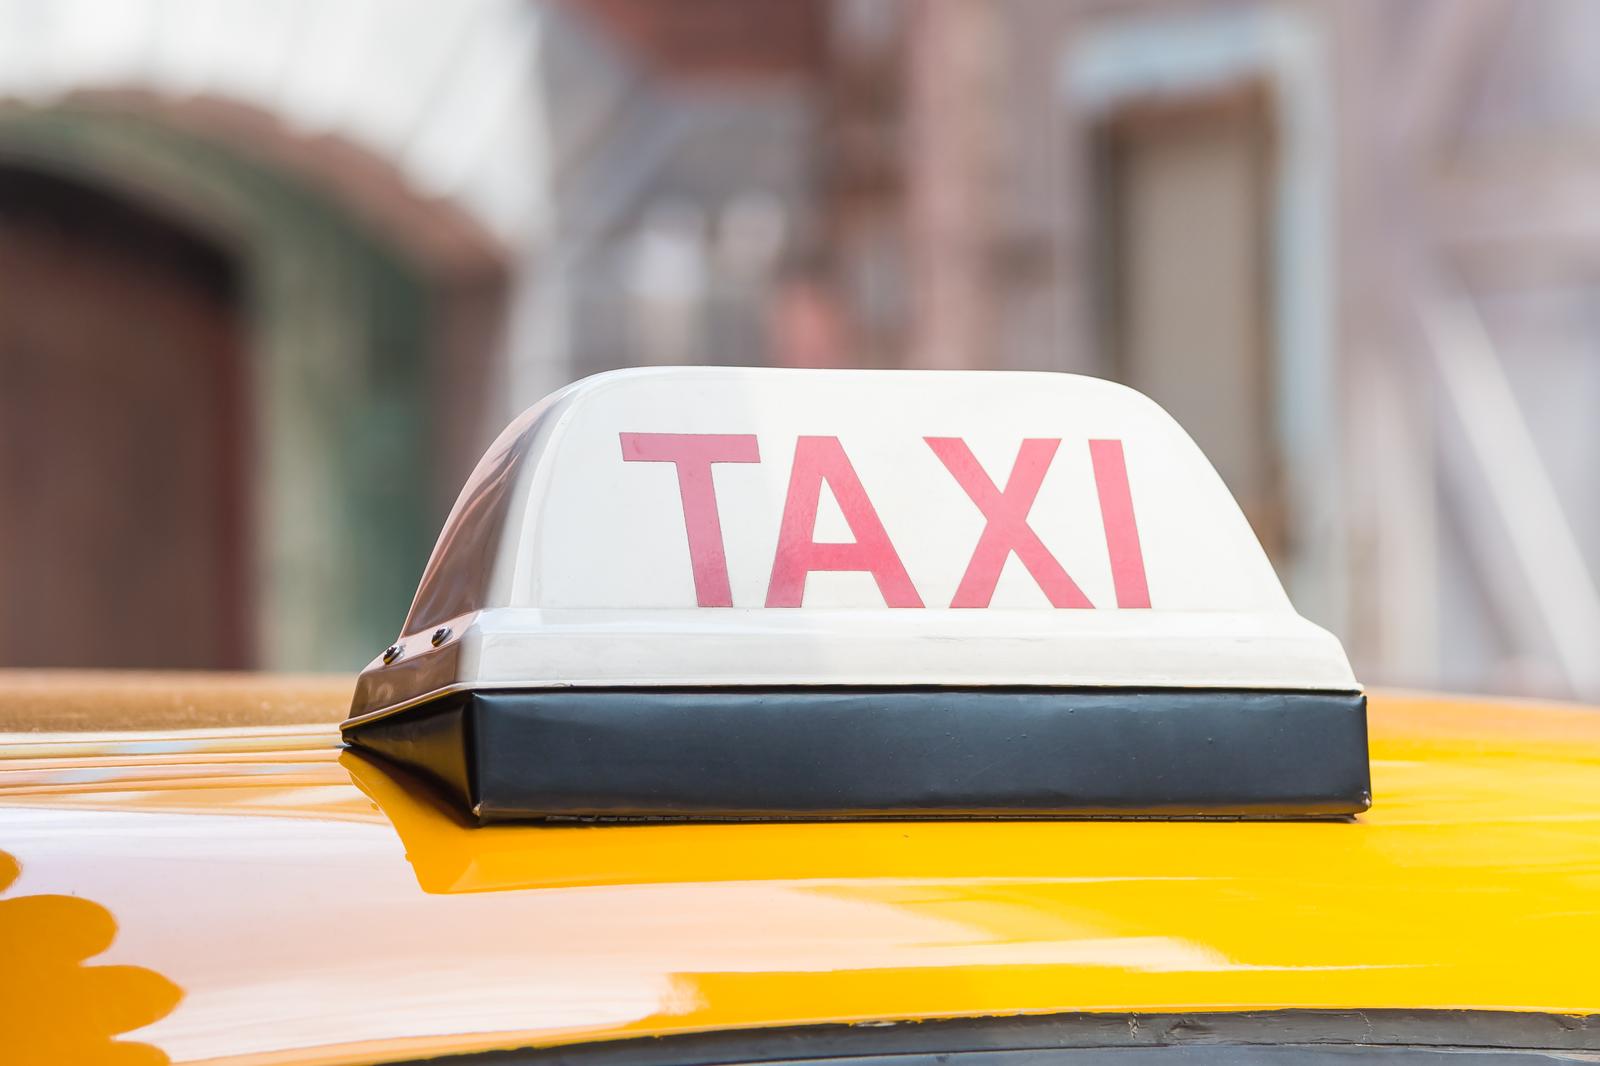 1 ABTO OÜ - Taxi transport and other related services, products, consultations